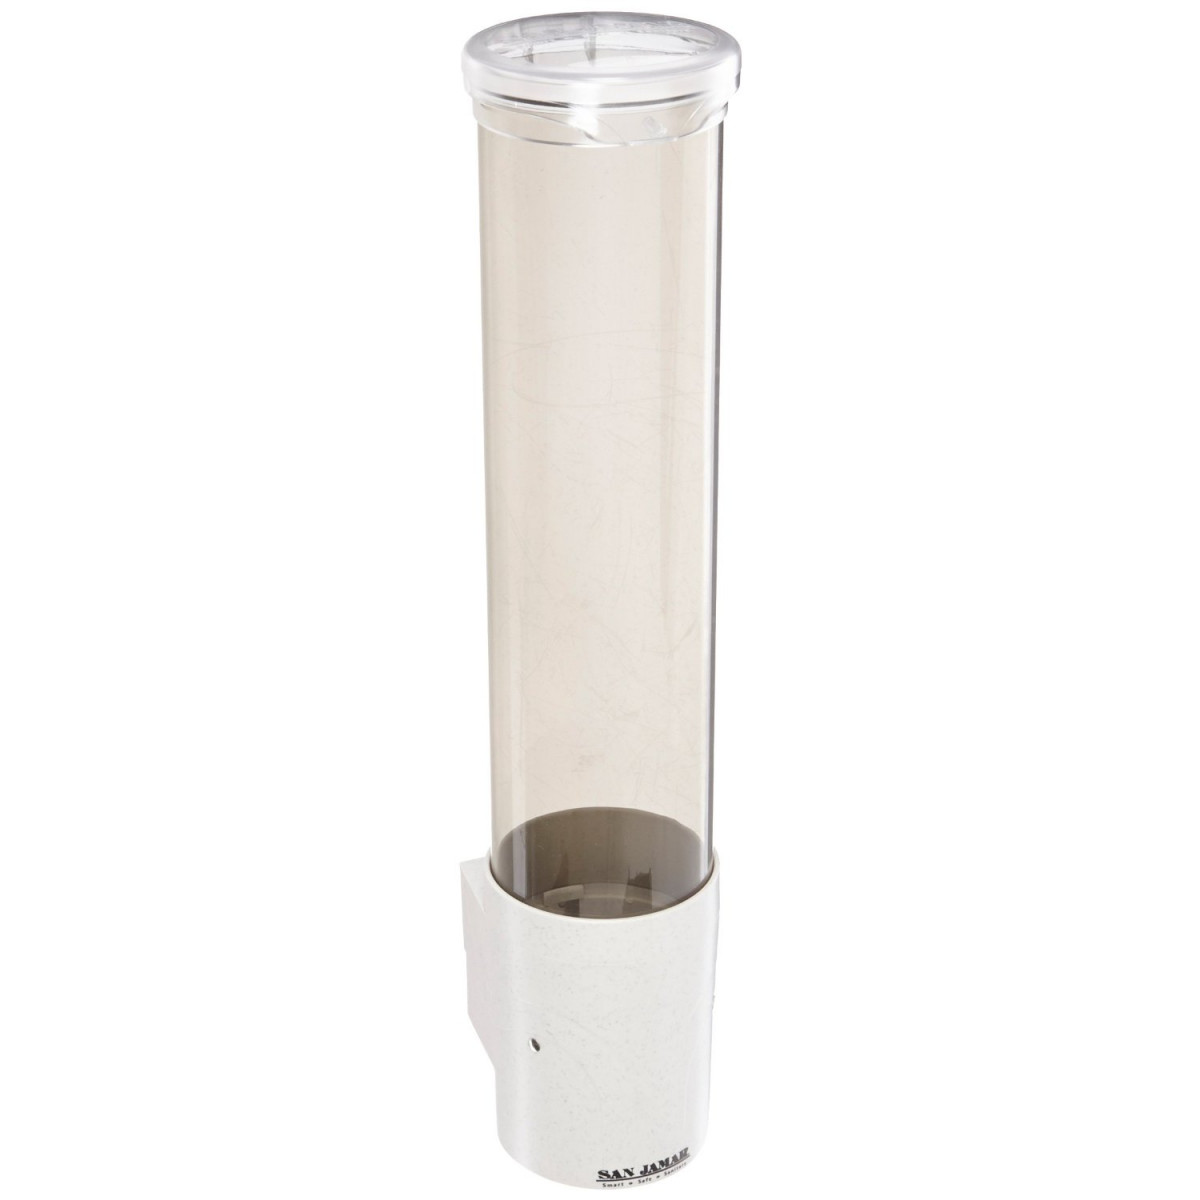 2-1/4 to 2-7/8 Rim Bronze Fits 3oz to 4-1/2oz Cone and 3oz to 5oz Flat Cup Size 16 Tube Length San Jamar C4180 Small Pull Type Water Cup Dispenser with White Sand Throat 